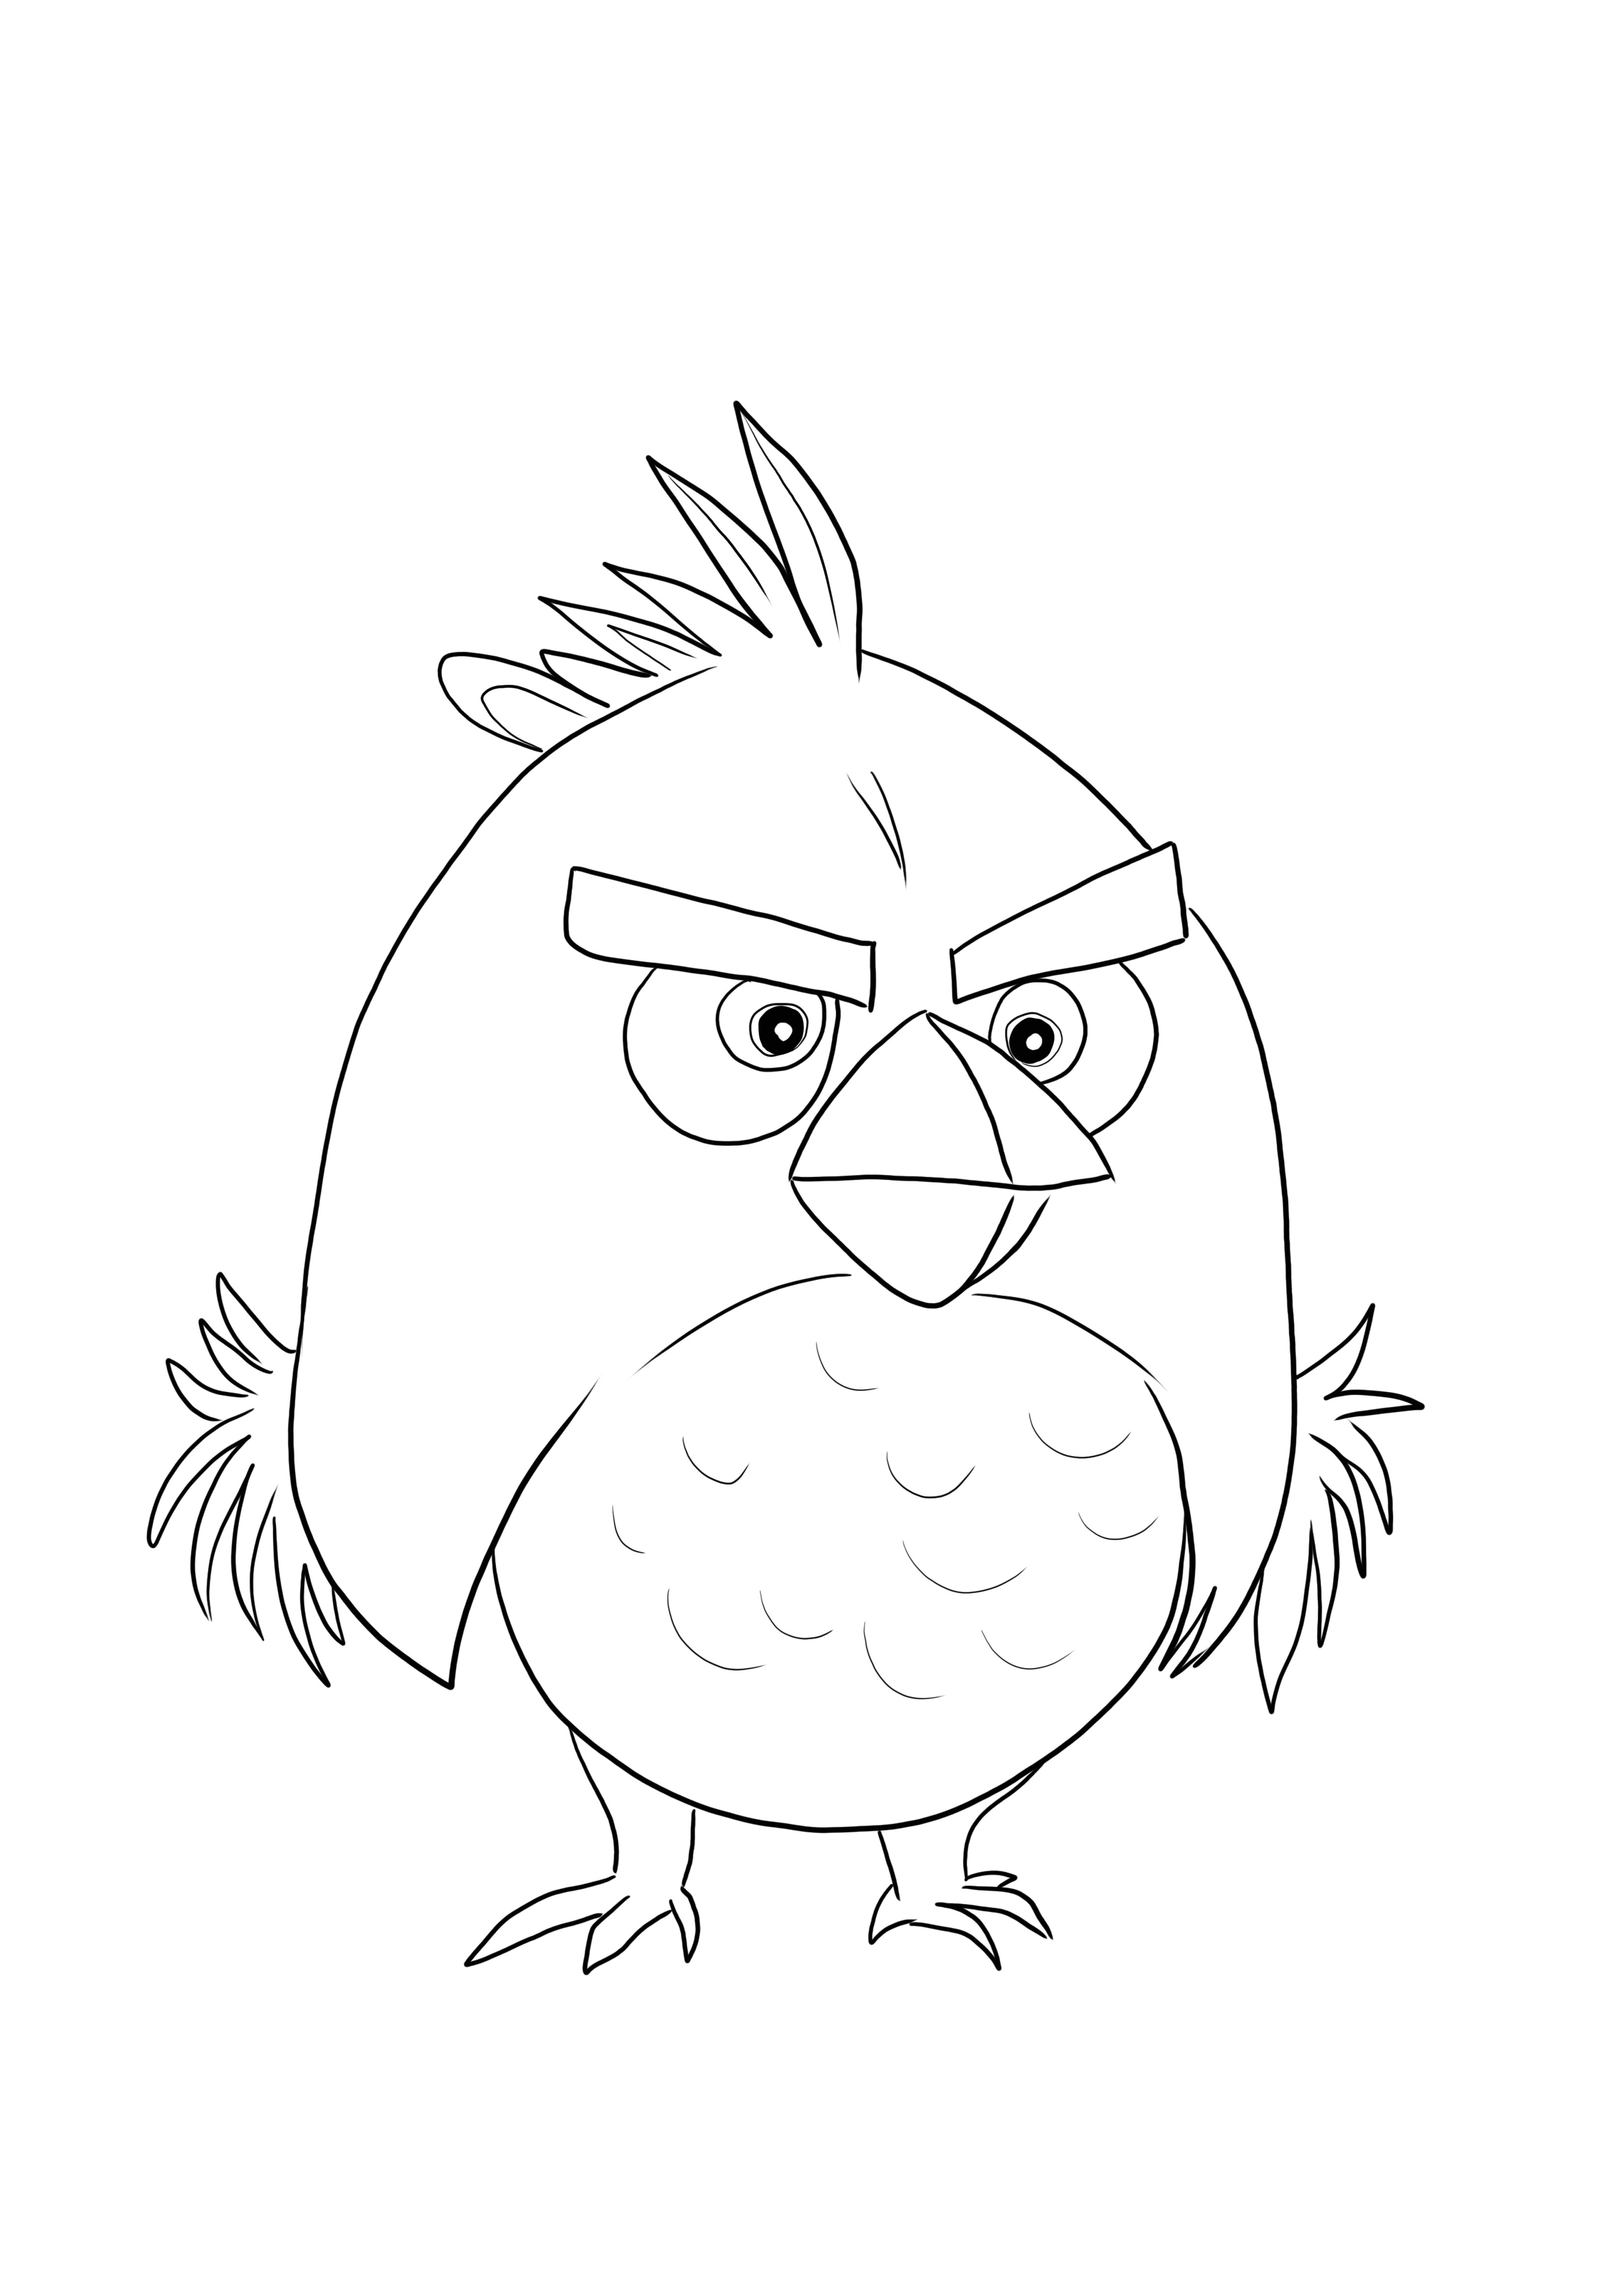 Red Bird from Angry Birds is ready to be printed and colored with favorite colors